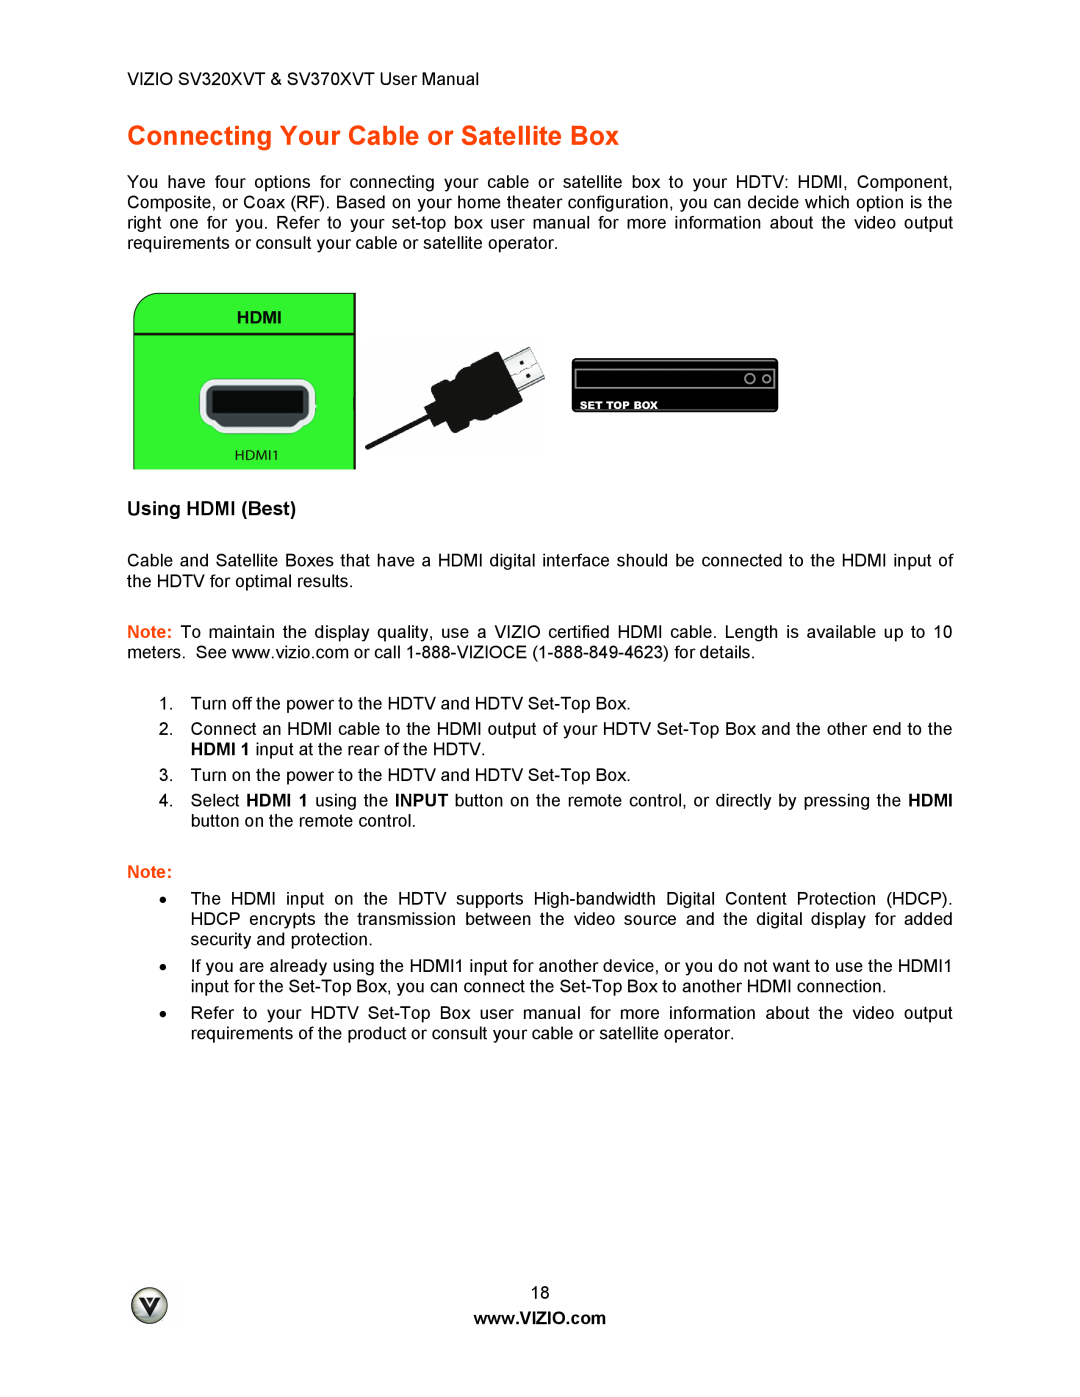 Vizio SV320XVT, SV370XVT user manual Connecting Your Cable or Satellite Box, Using HDMI Best 